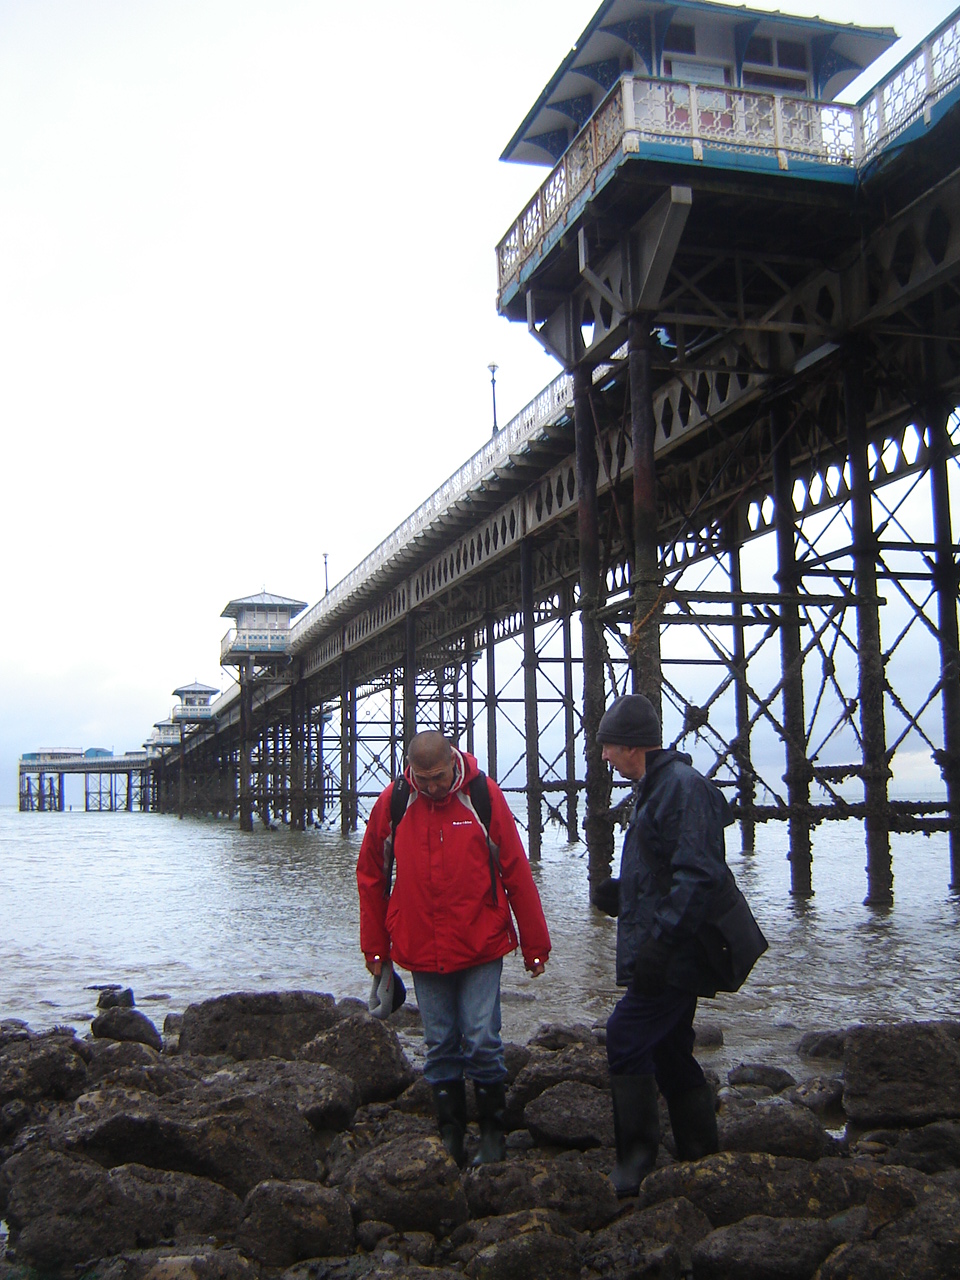 Looking for the remains of the oiginal Llandudno pier